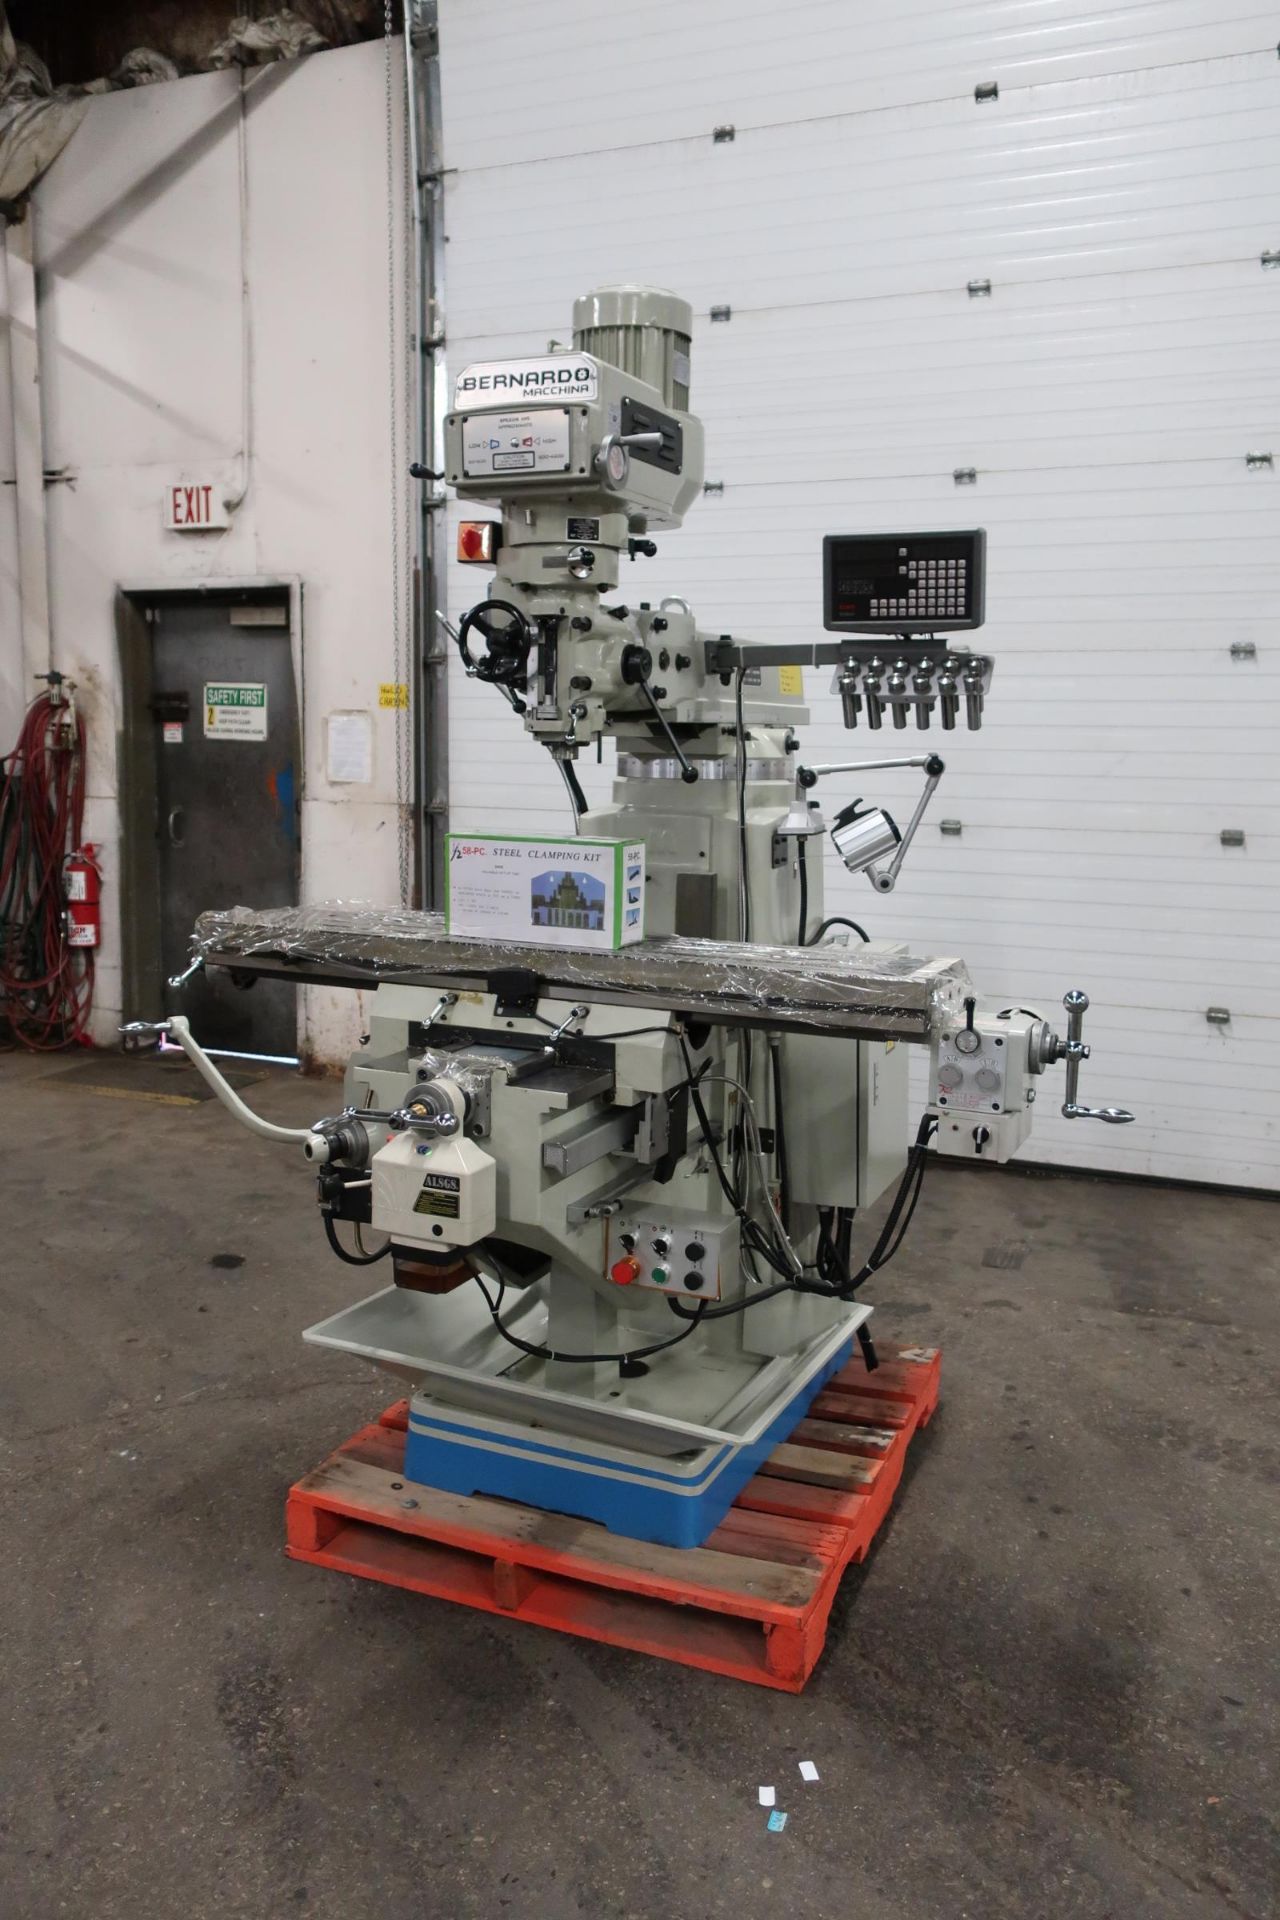 Bernardo MINT / UNUSED Milling Machine with Full Power Feed Table on ALL AXIS (X, Y and Z) 54" x 10" - Image 2 of 3